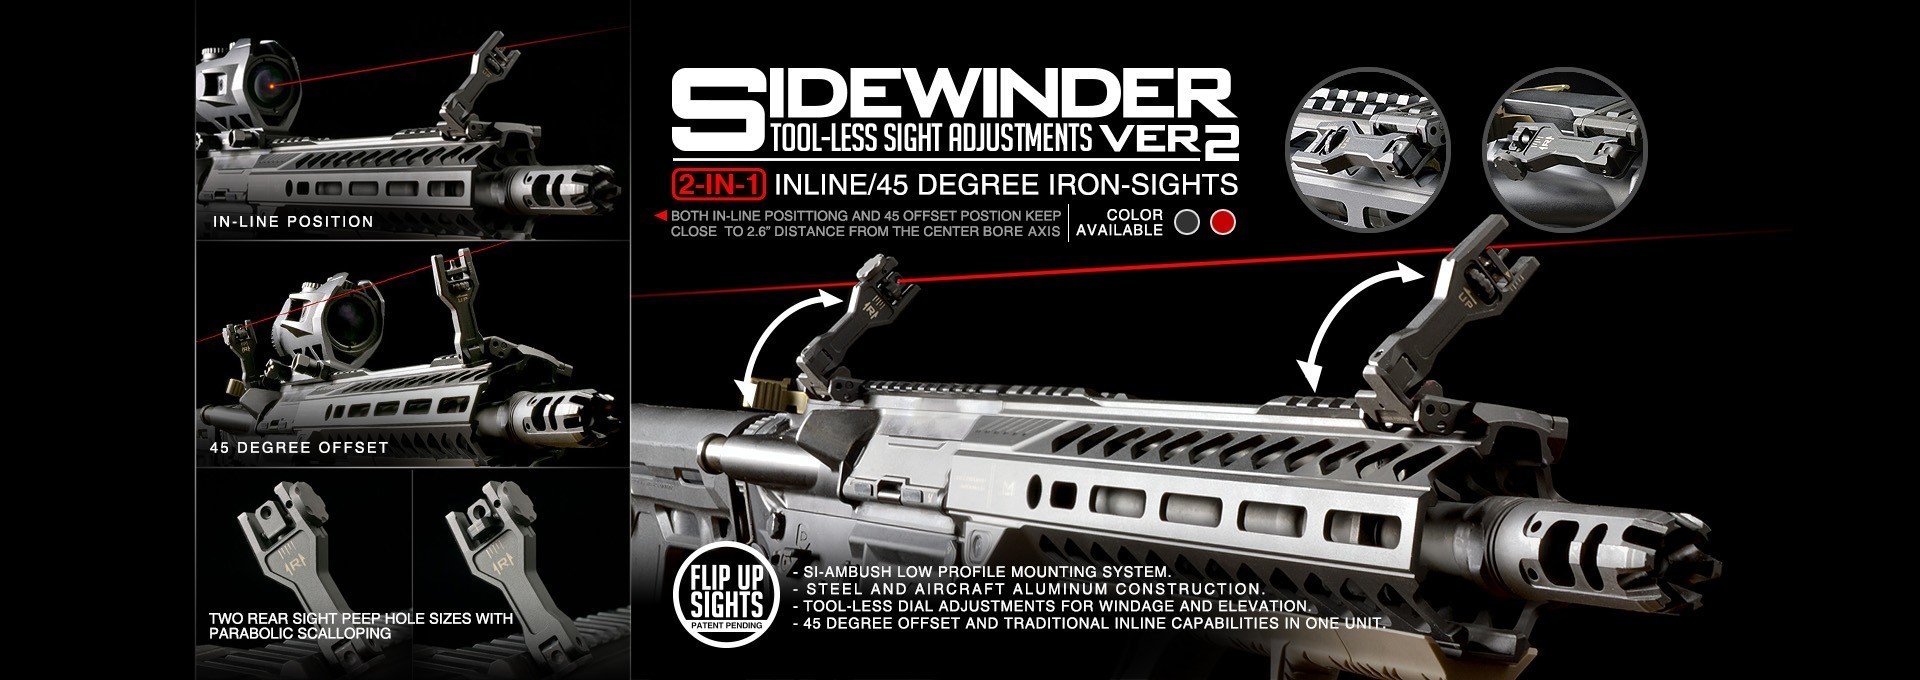 Strike Industries Sidewinder II 45-Degree Offset / Inline Back-Up Iron Sight - Red | Redcon1 Tactical